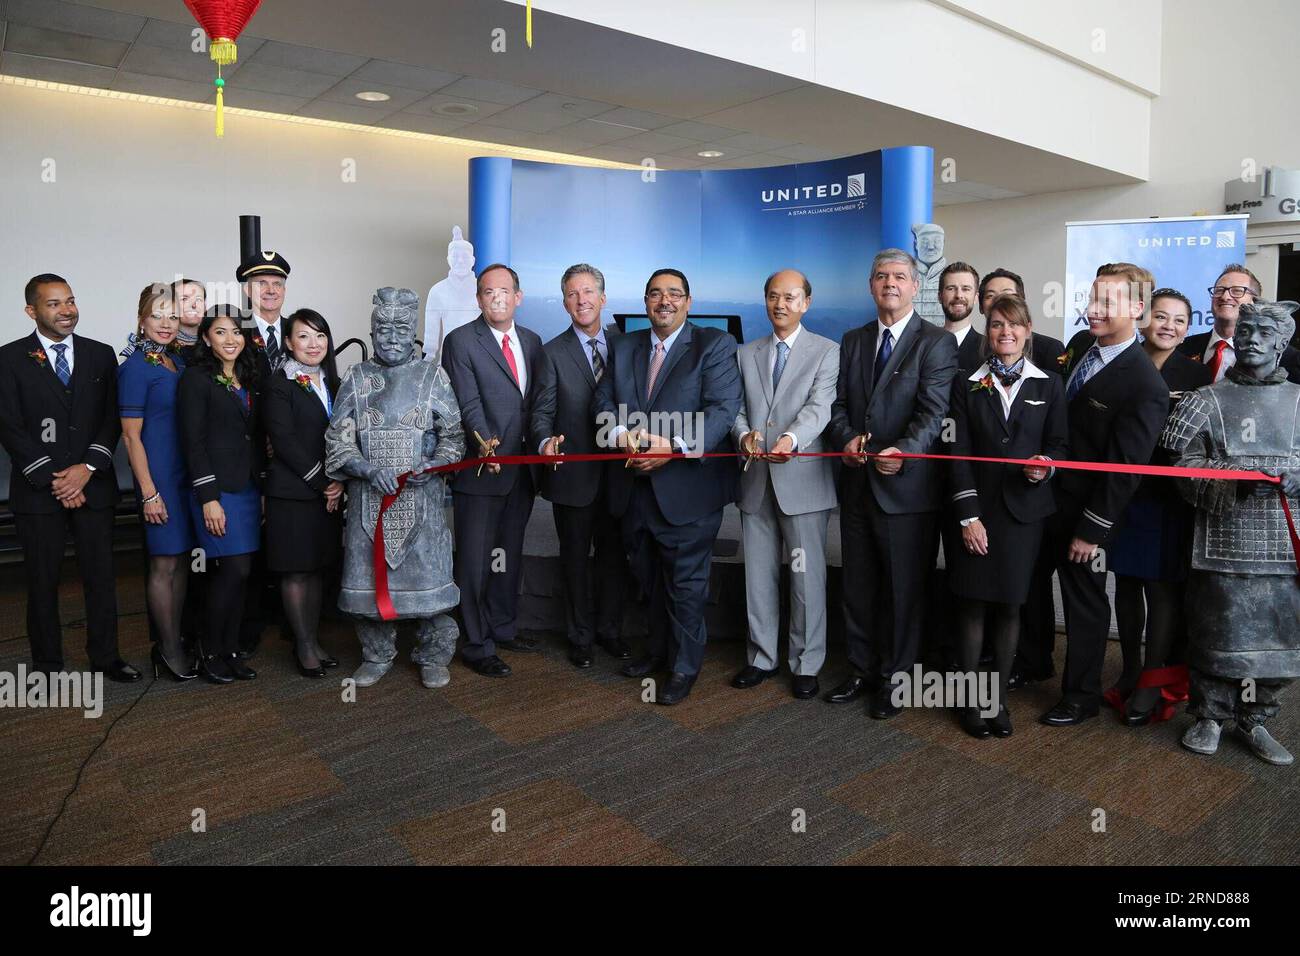 (160509) -- SAN FRANCISCO, May 9, 2016 -- Chinese Consul General in San Francisco Luo Linquan (5th R), United Airlines vice president of Atlantic and Pacific sales Marcel Fuchs (4th R) and other guests cut the ribbon for the United s inaugural nonstop flight from San Francisco to China s Xi an at the San Francisco International Airport, United States, on May 8, 2016. United Airlines celebrated the launch of new nonstop flights from U.S. west coast city San Francisco to Chinese western city Xi an at the San Francisco International Airport on Sunday. The three-times-weekly seasonal service, the Stock Photo